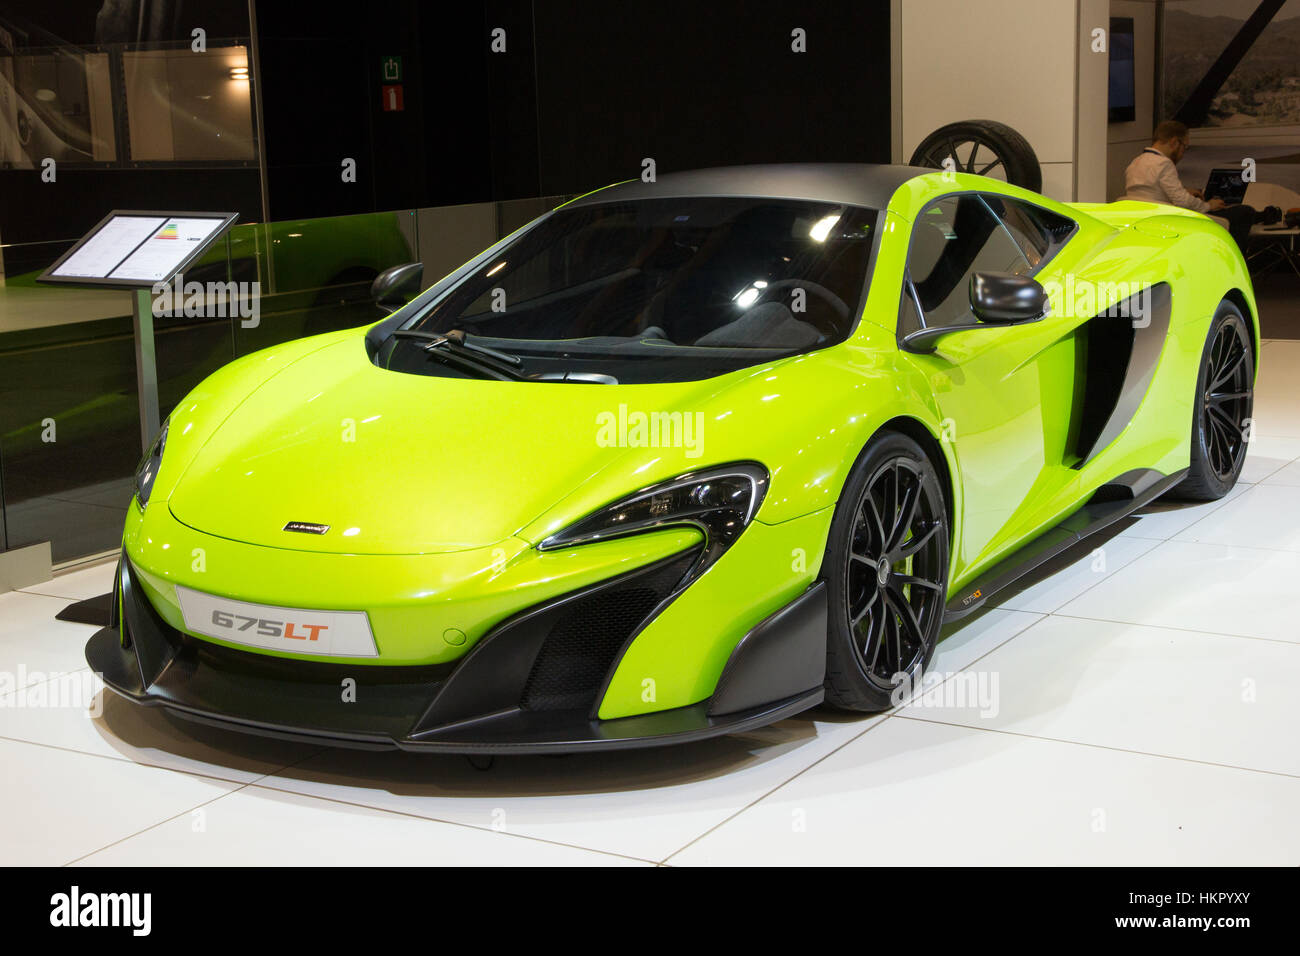 BRUSSELS - JAN 12, 2016: McLaren 675LT sports car shown at the Brussels Motor Show. Stock Photo